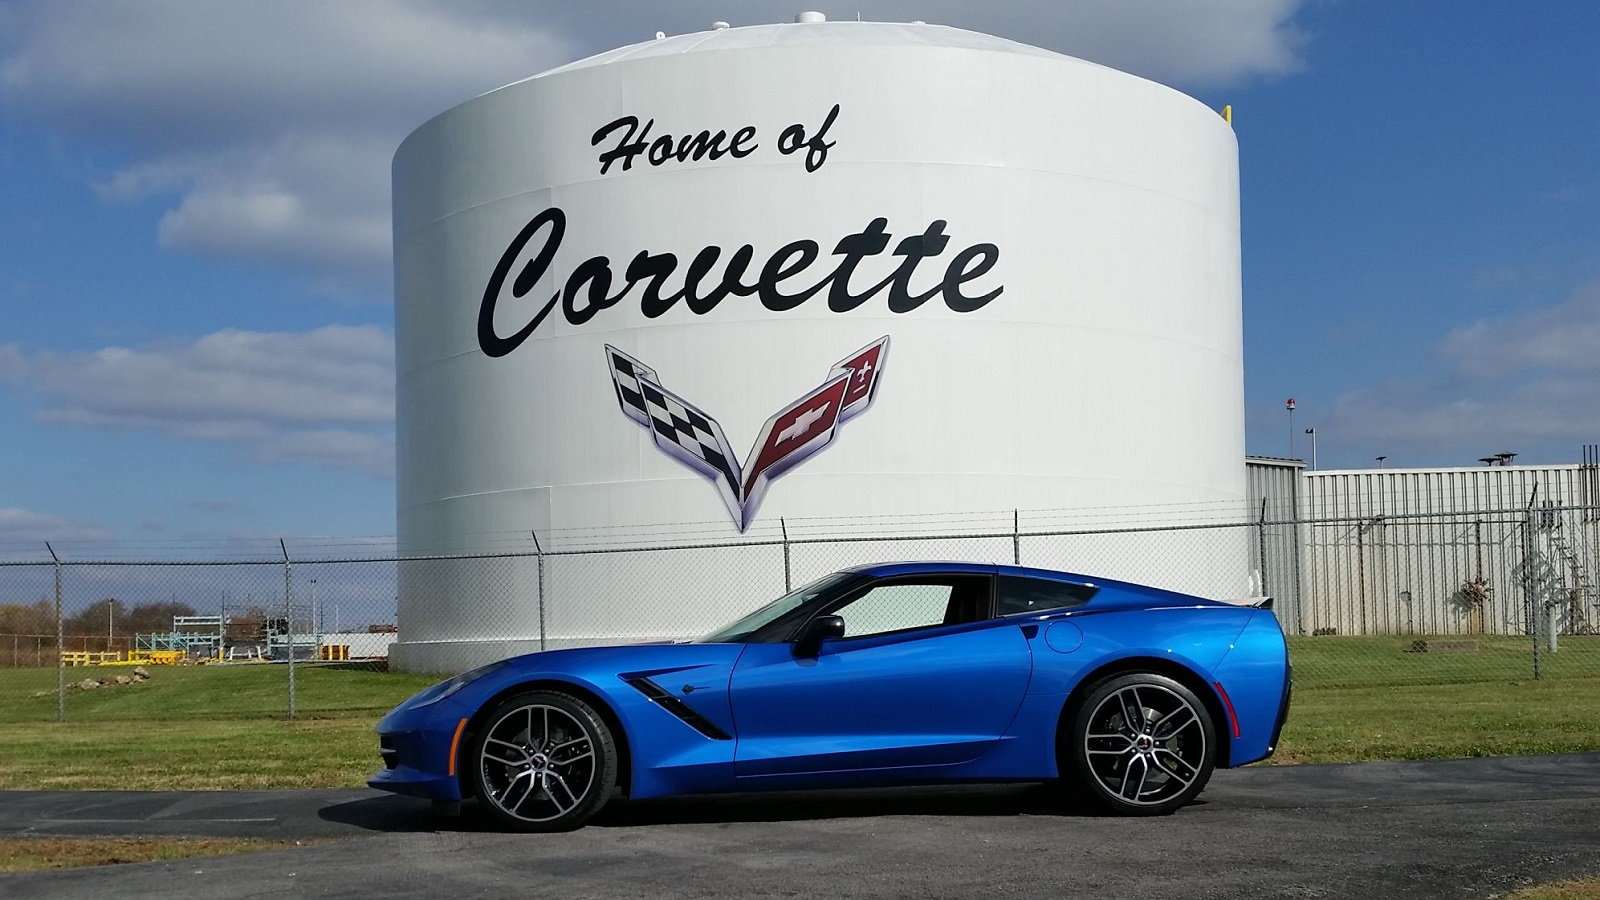 6 Things to See and Do at the Bowling Green Corvette Factory.